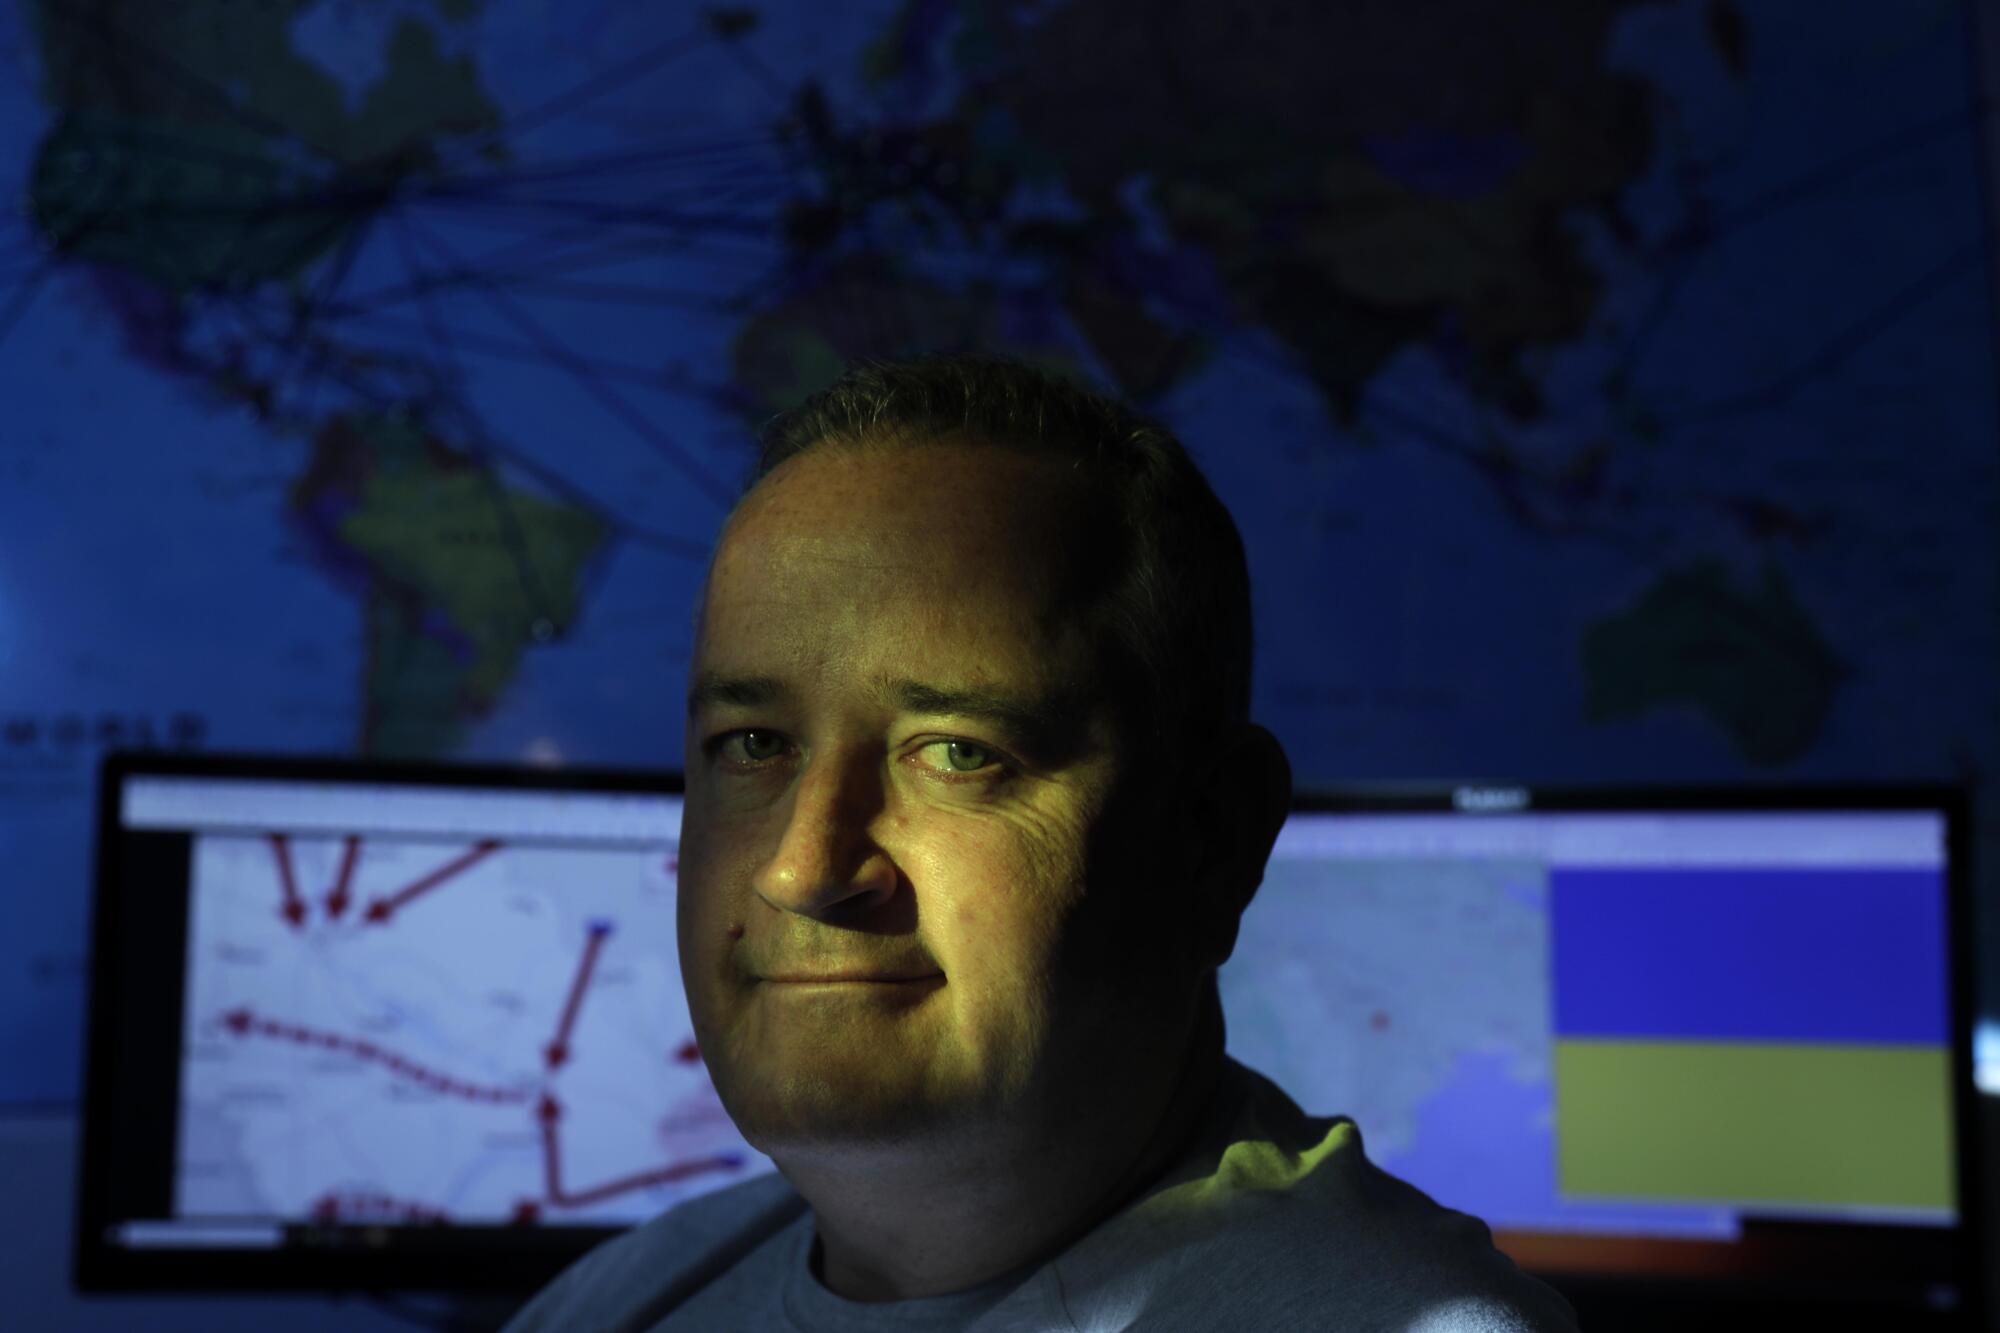 A portrait of a man against a background of computer screens and a large map